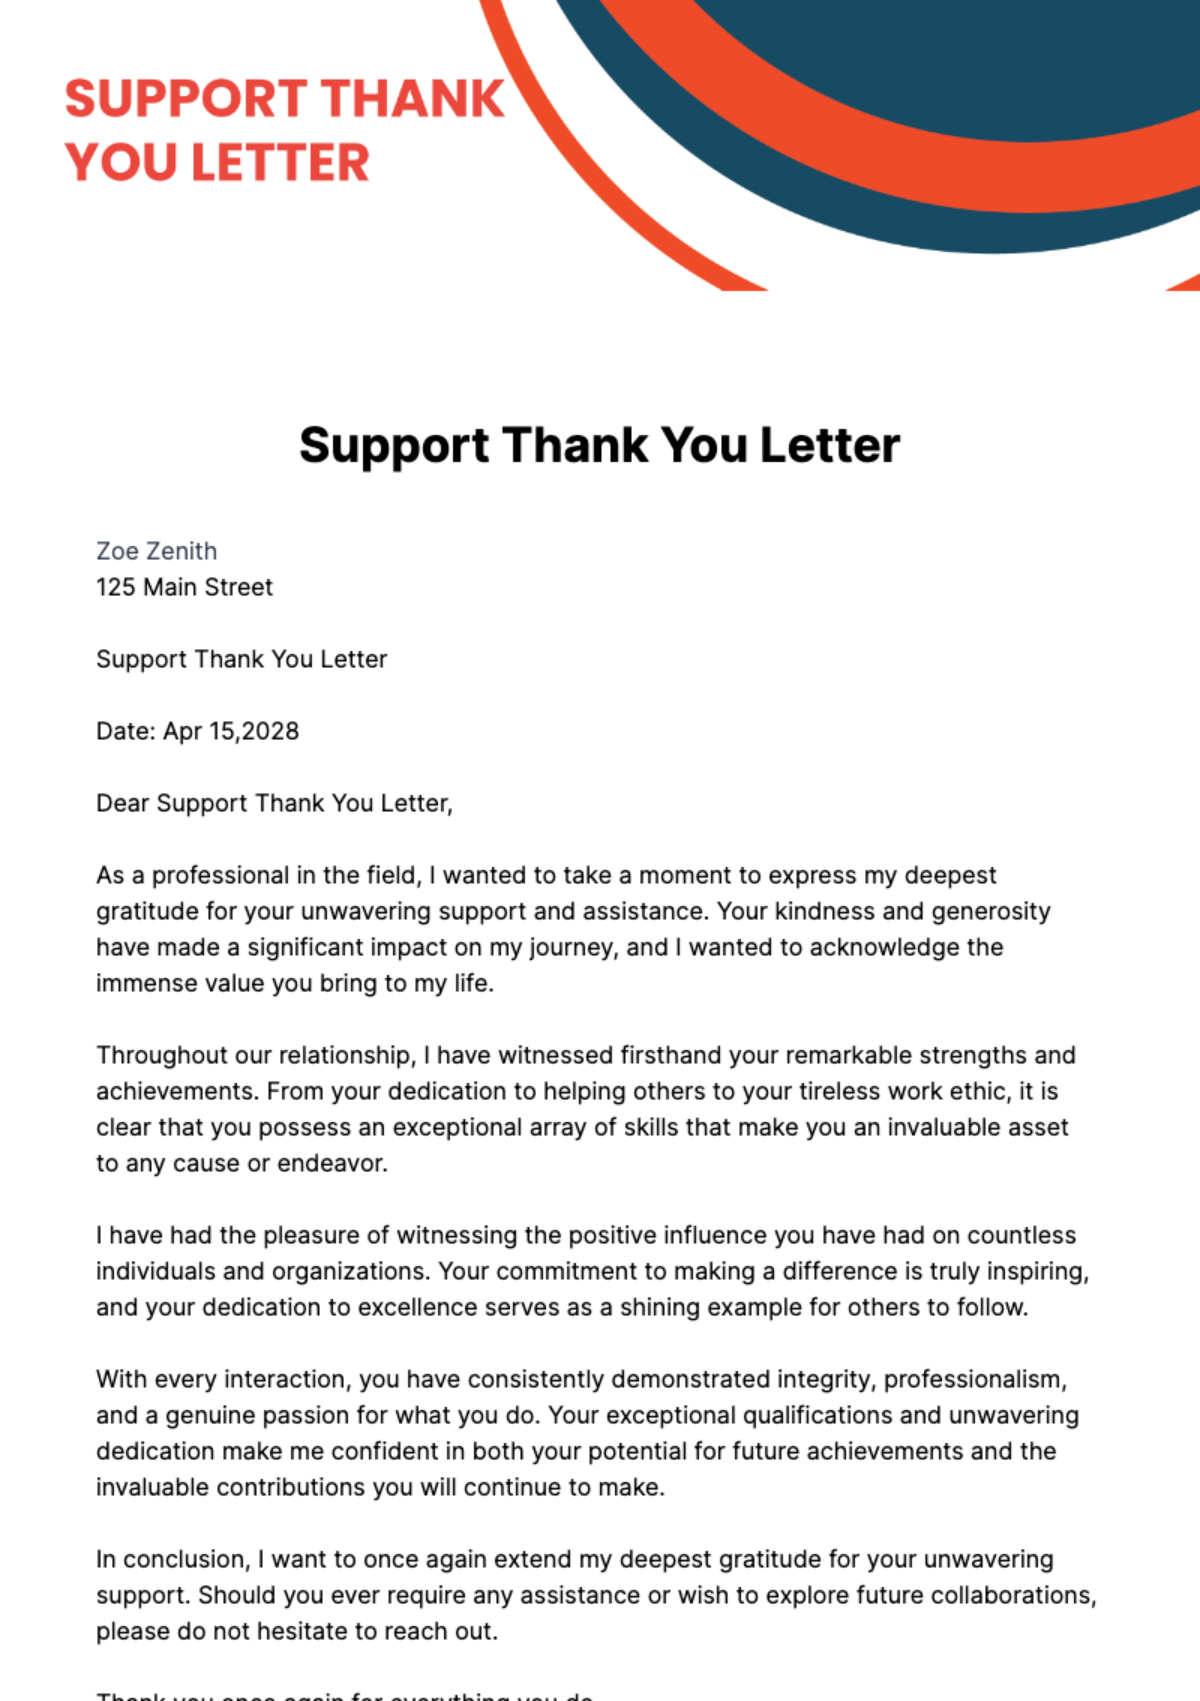 Support Thank You Letter Template